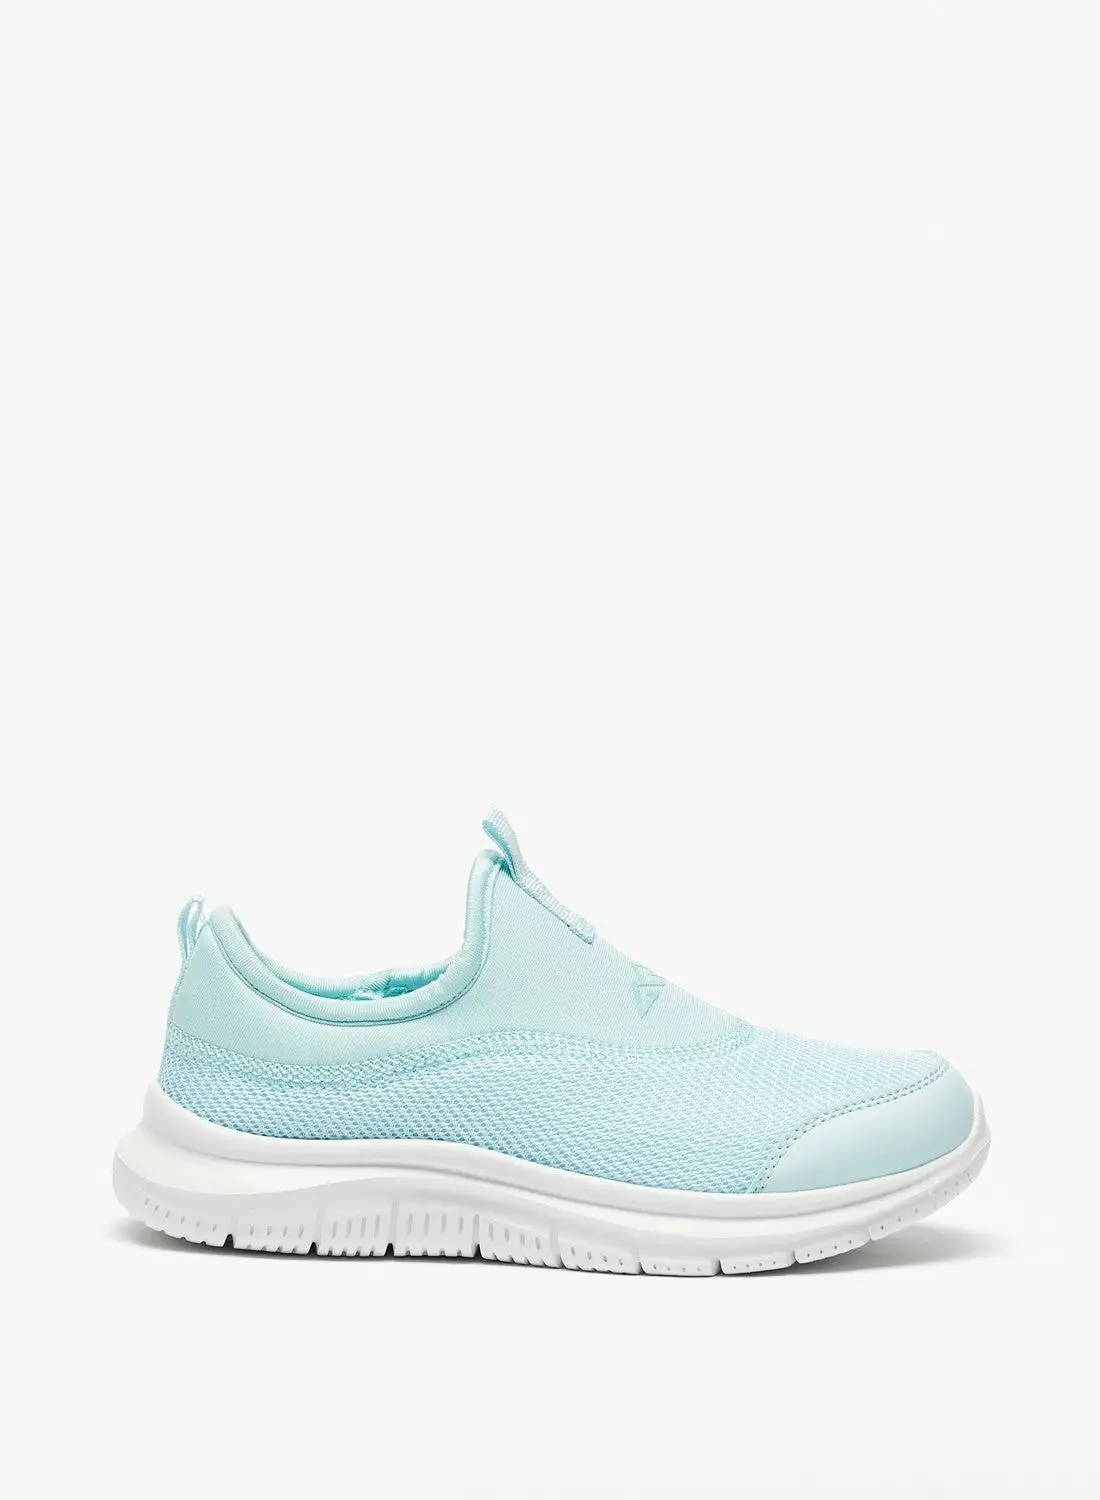 Oaklan by Shoexpress Girls Textured Slip On Sports Shoes with Pull Tabs